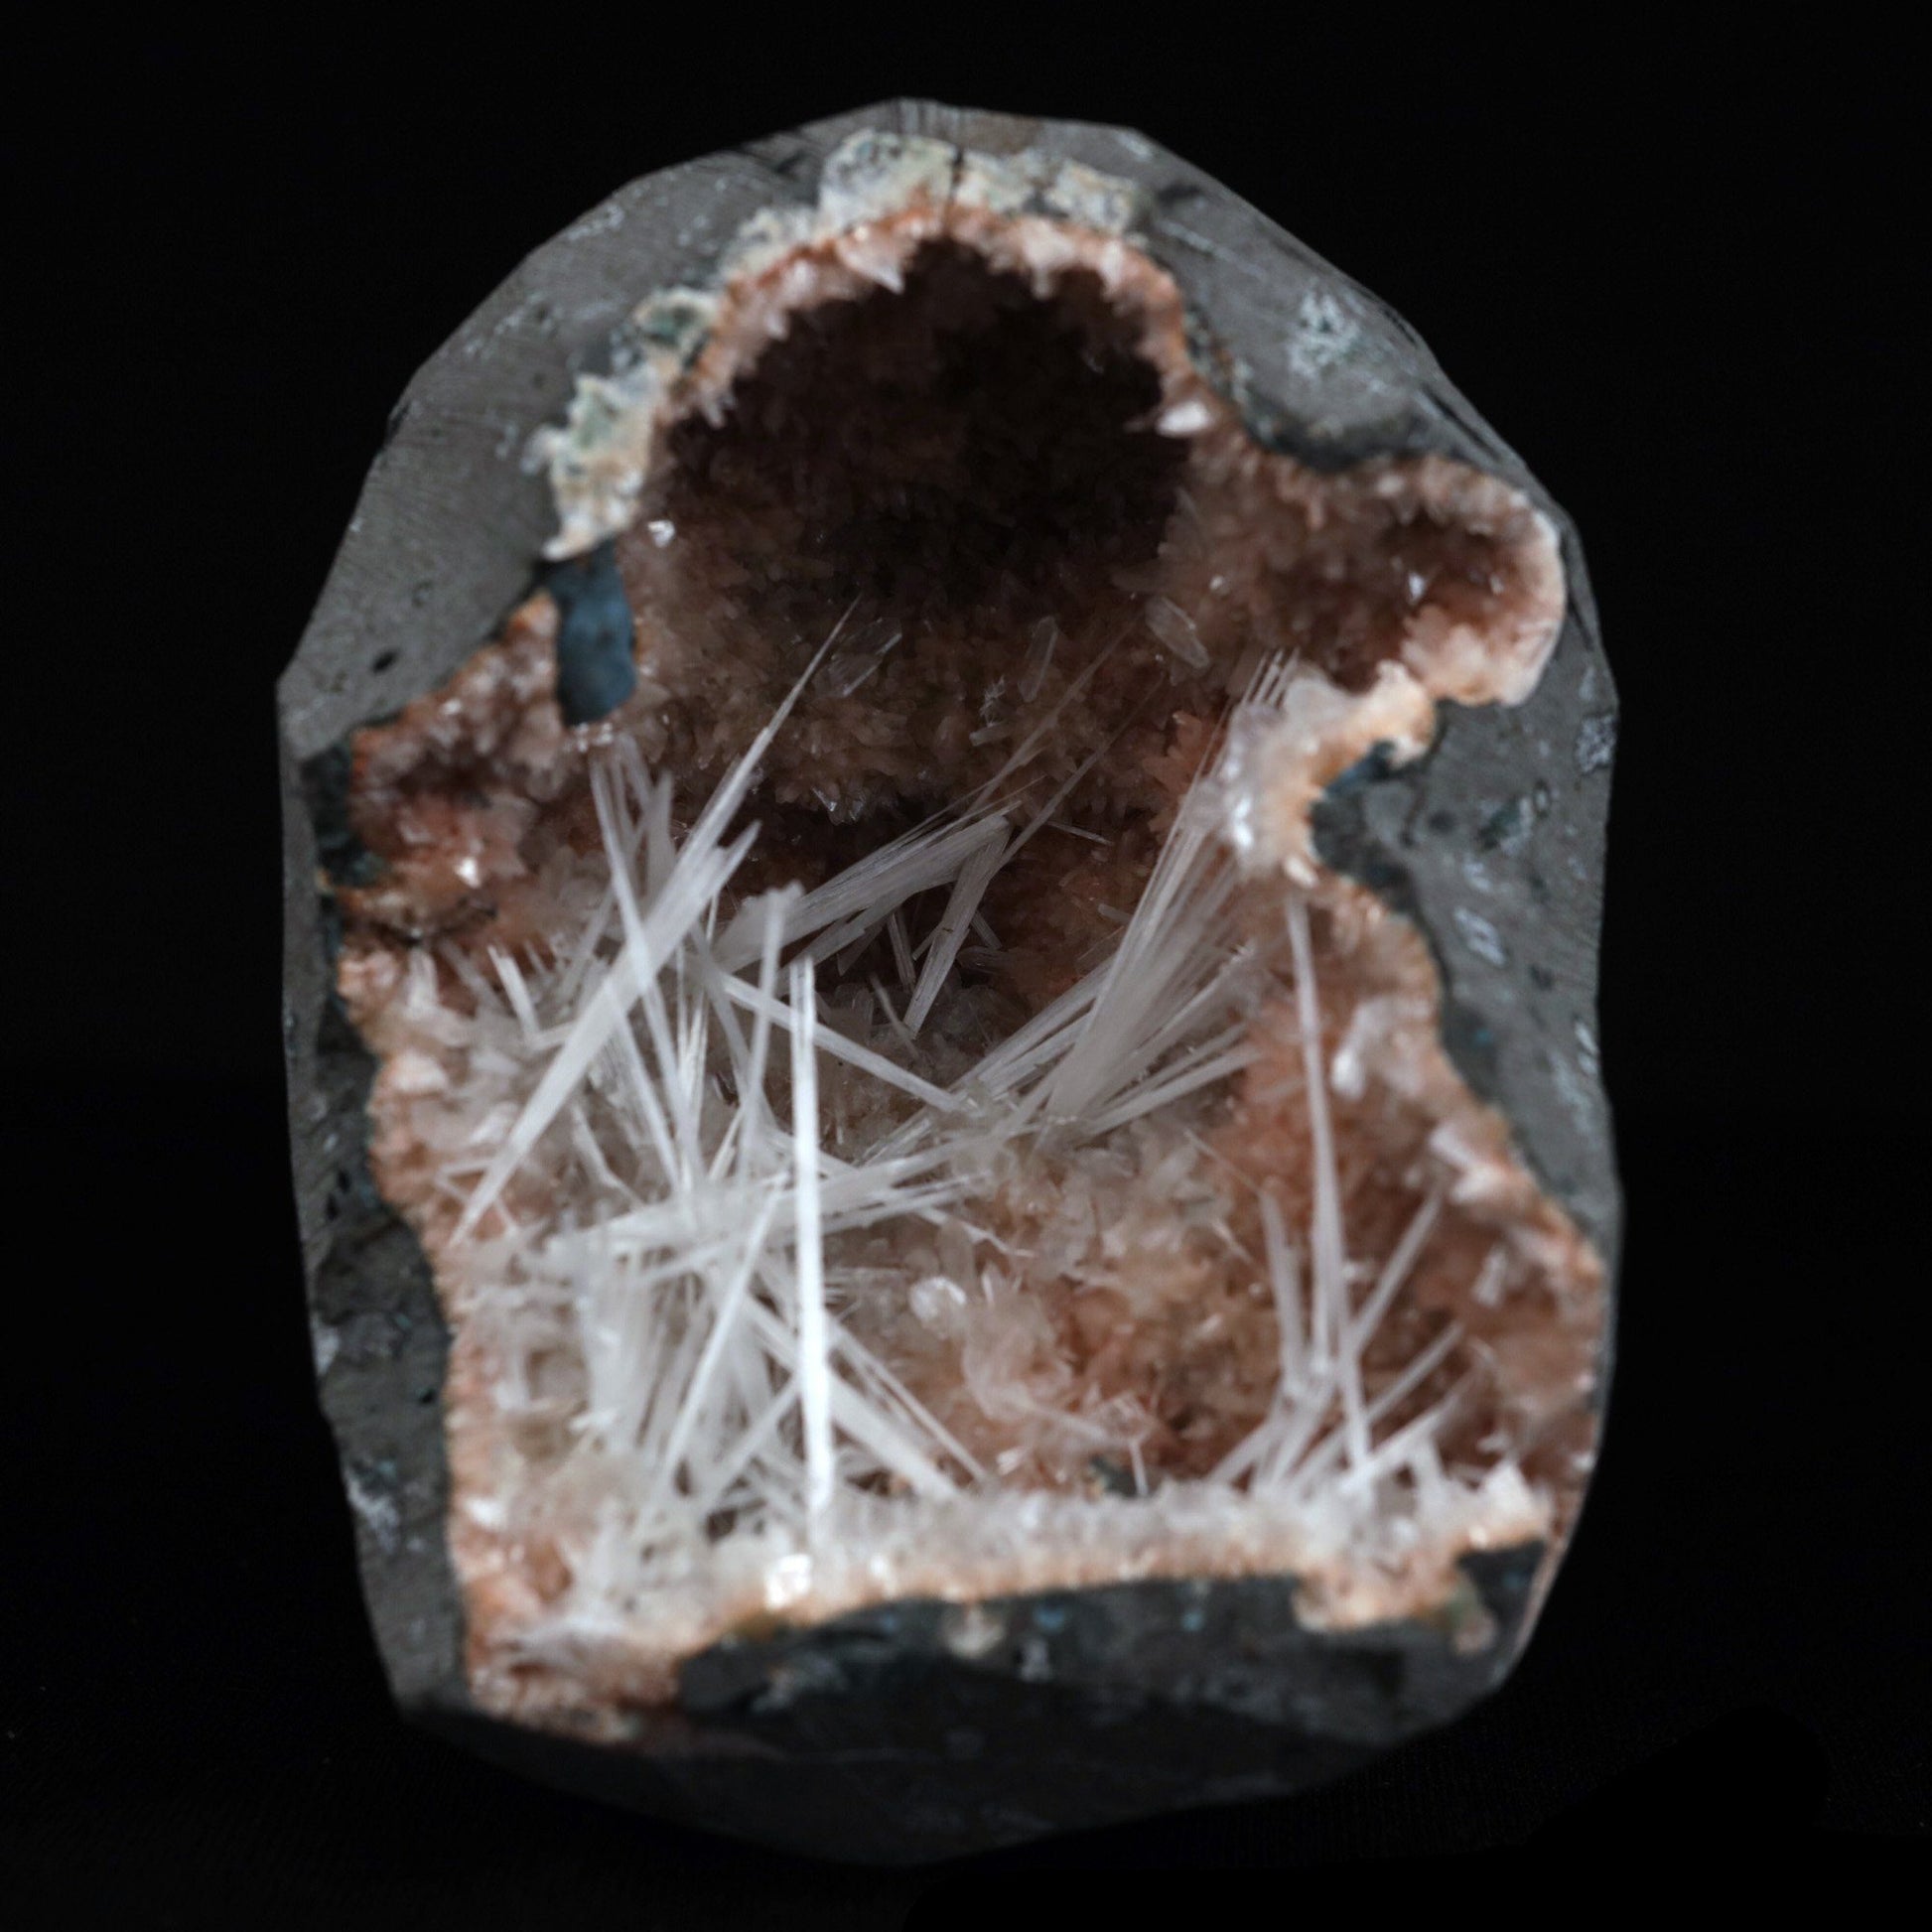 Scolecite Sprays Inside Heulandite Geode Natural Mineral Specimen # B…  https://www.superbminerals.us/products/scolecite-sprays-inside-heulandite-geode-natural-mineral-specimen-b-4908  Features: Scolecite crystals are interspersed throughout a very large Geode that is lined with beige Heulandite crystals. The sprays of Scolecite crystals are glossy, colourless, highly translucent, acicular (needle-like) in shape.The crystal creation is a work of art in and of itself. Primary Mineral(s): Scolecite